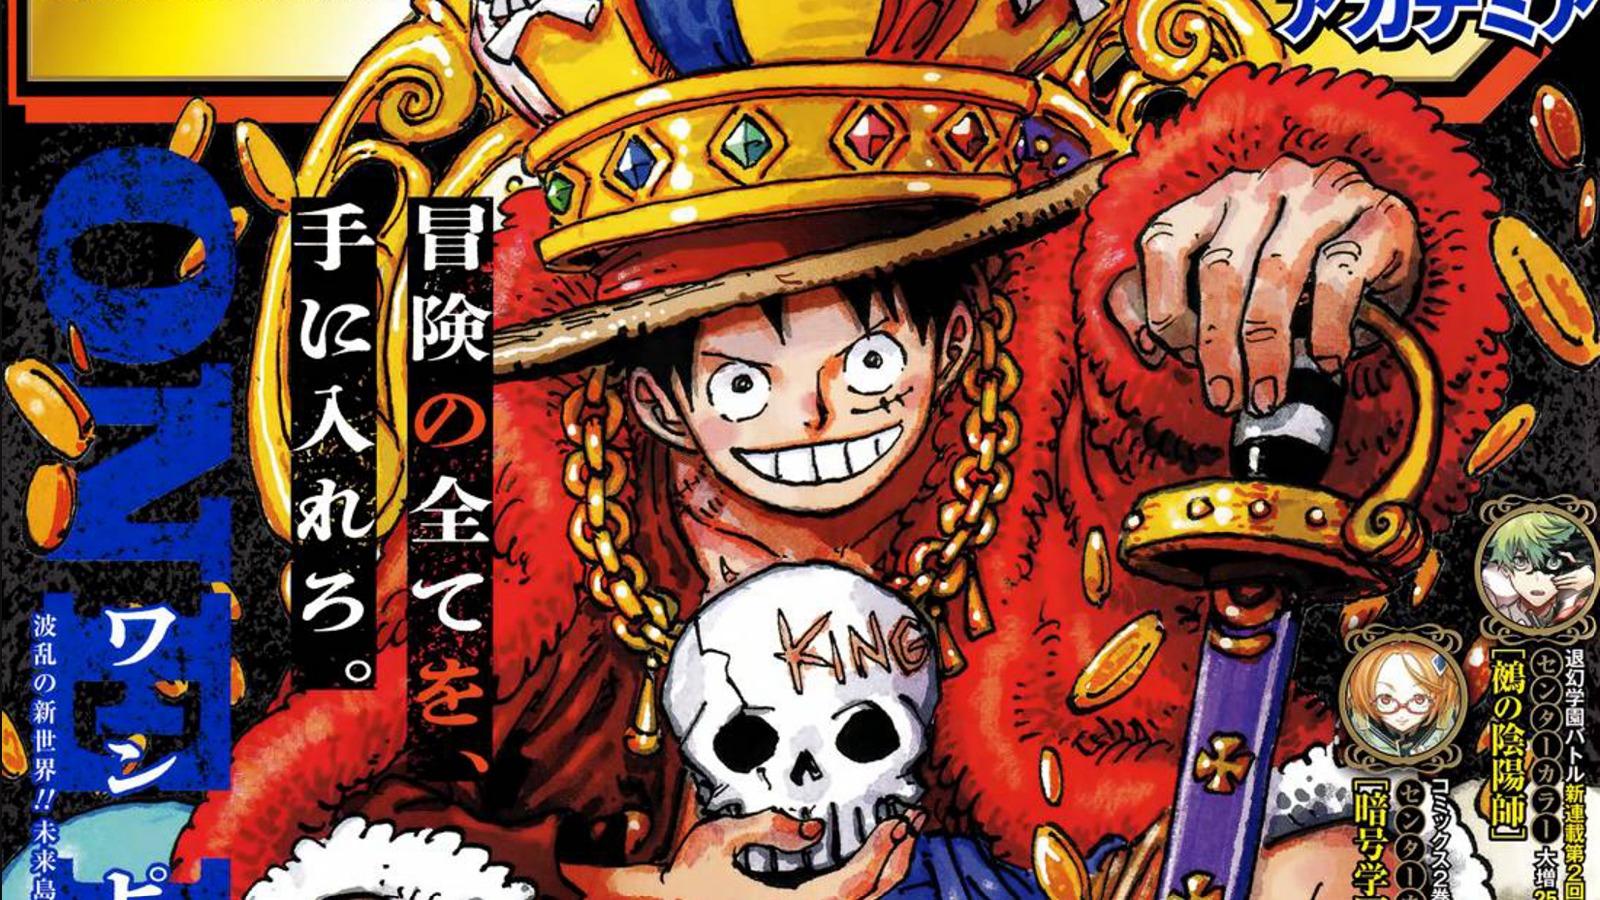 An image of One Piece chapter 1084 cover